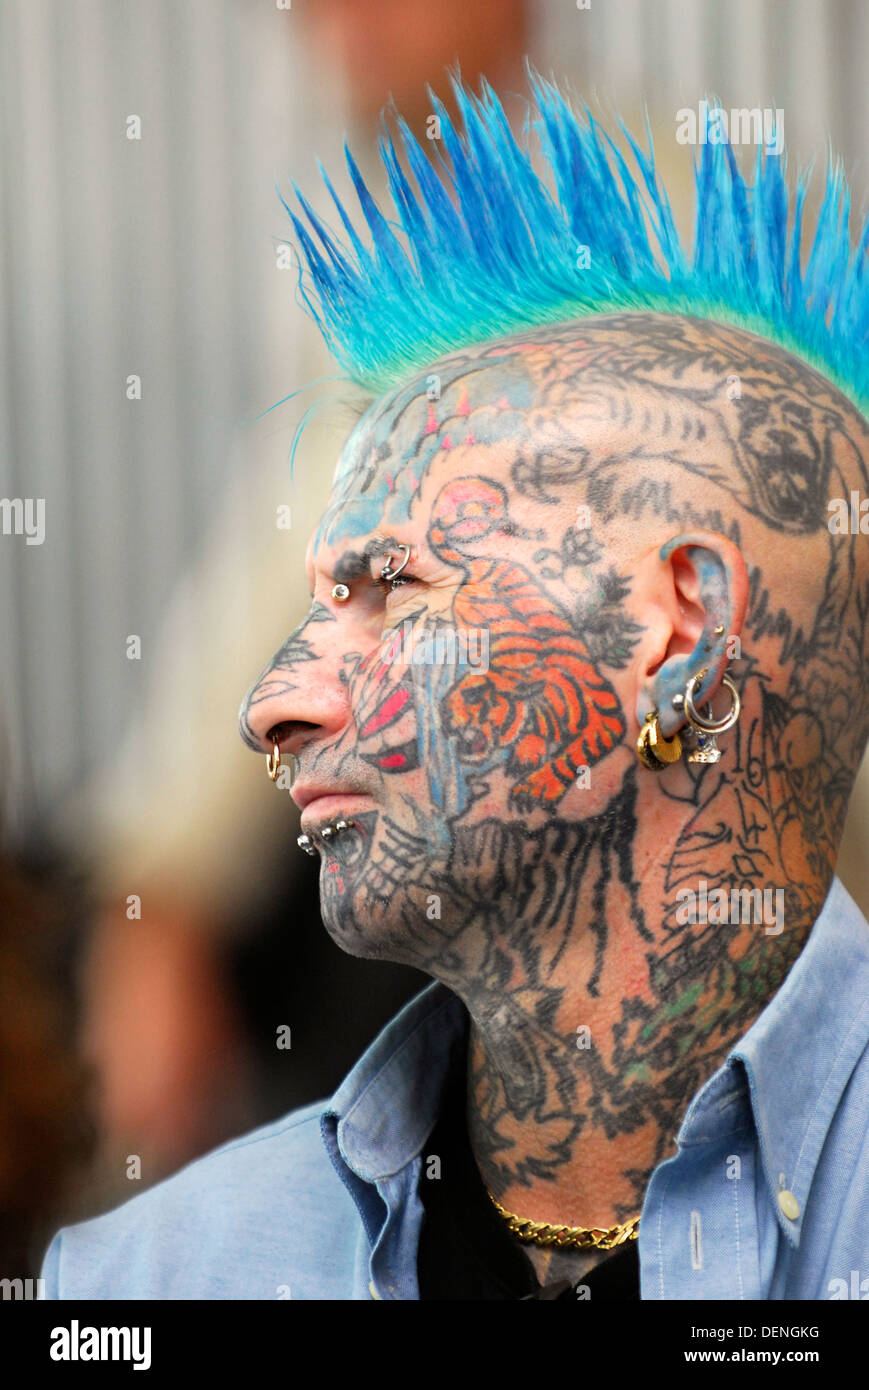 Man with body art and spikey hair, UK. Stock Photo